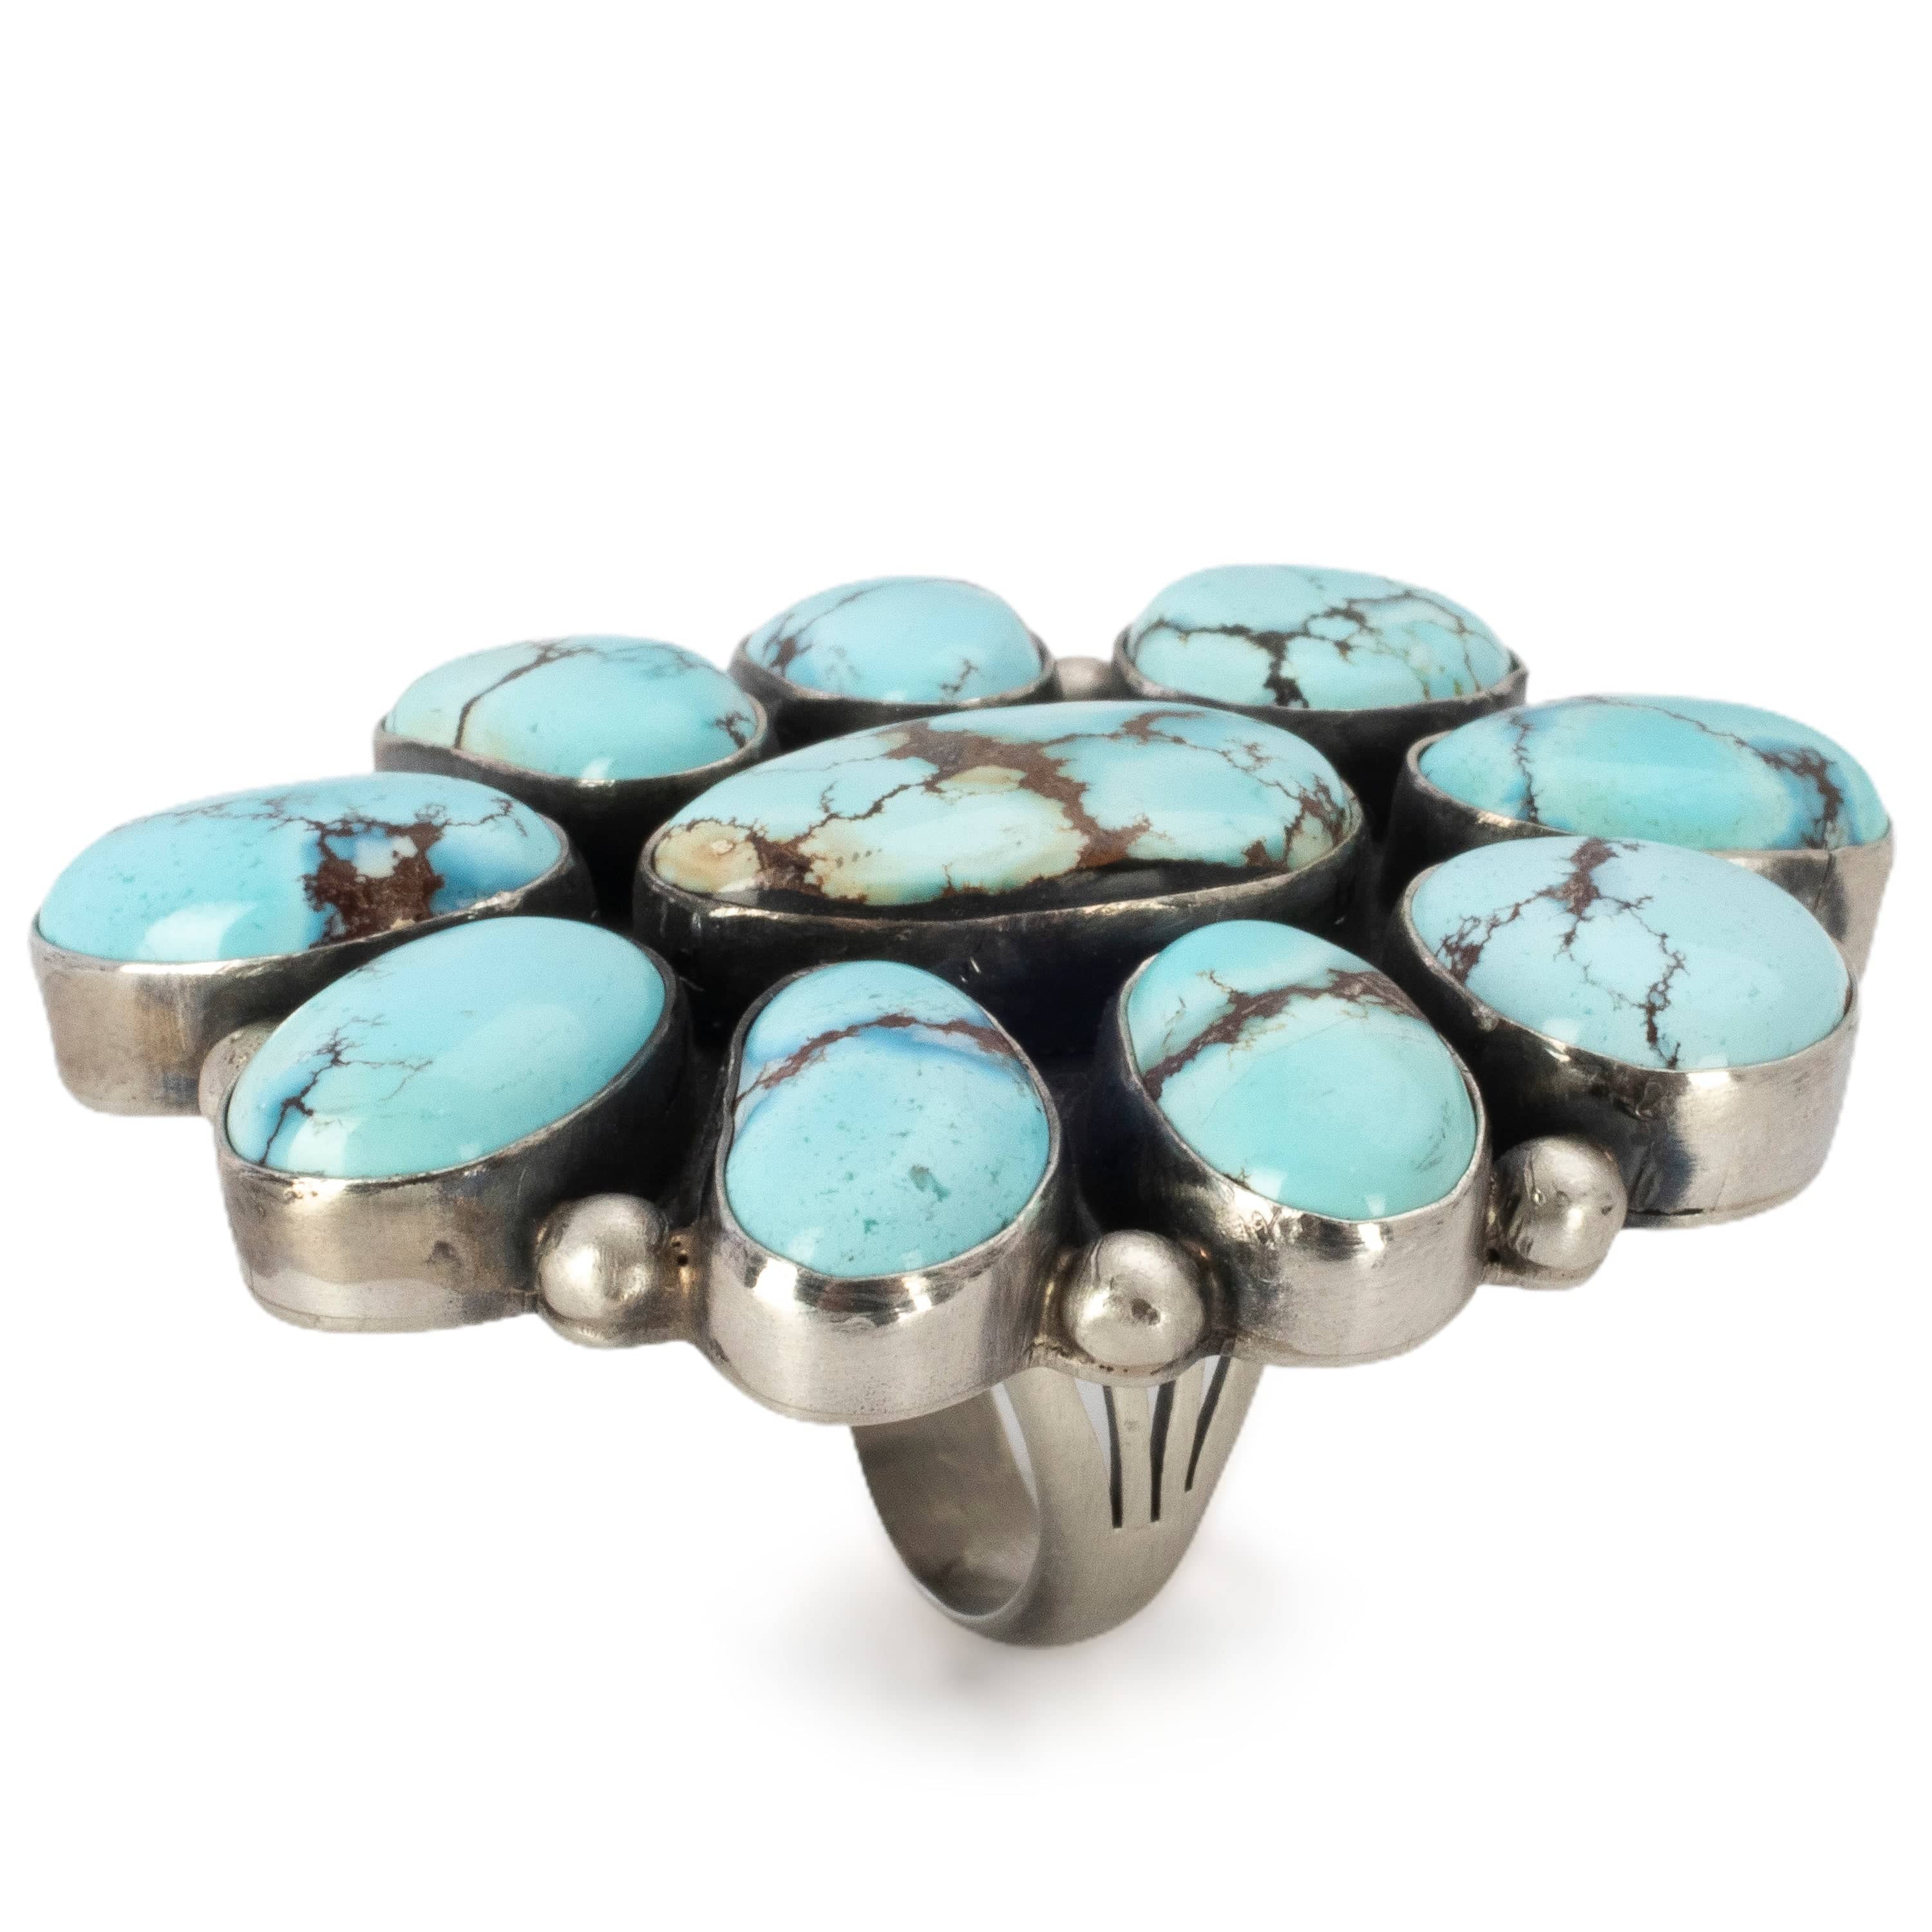 Kalifano Native American Jewelry 9 Paul Livingston Navajo Golden Hills Turquoise USA Native American Made 925 Sterling Silver Ring NAR3600.001.9